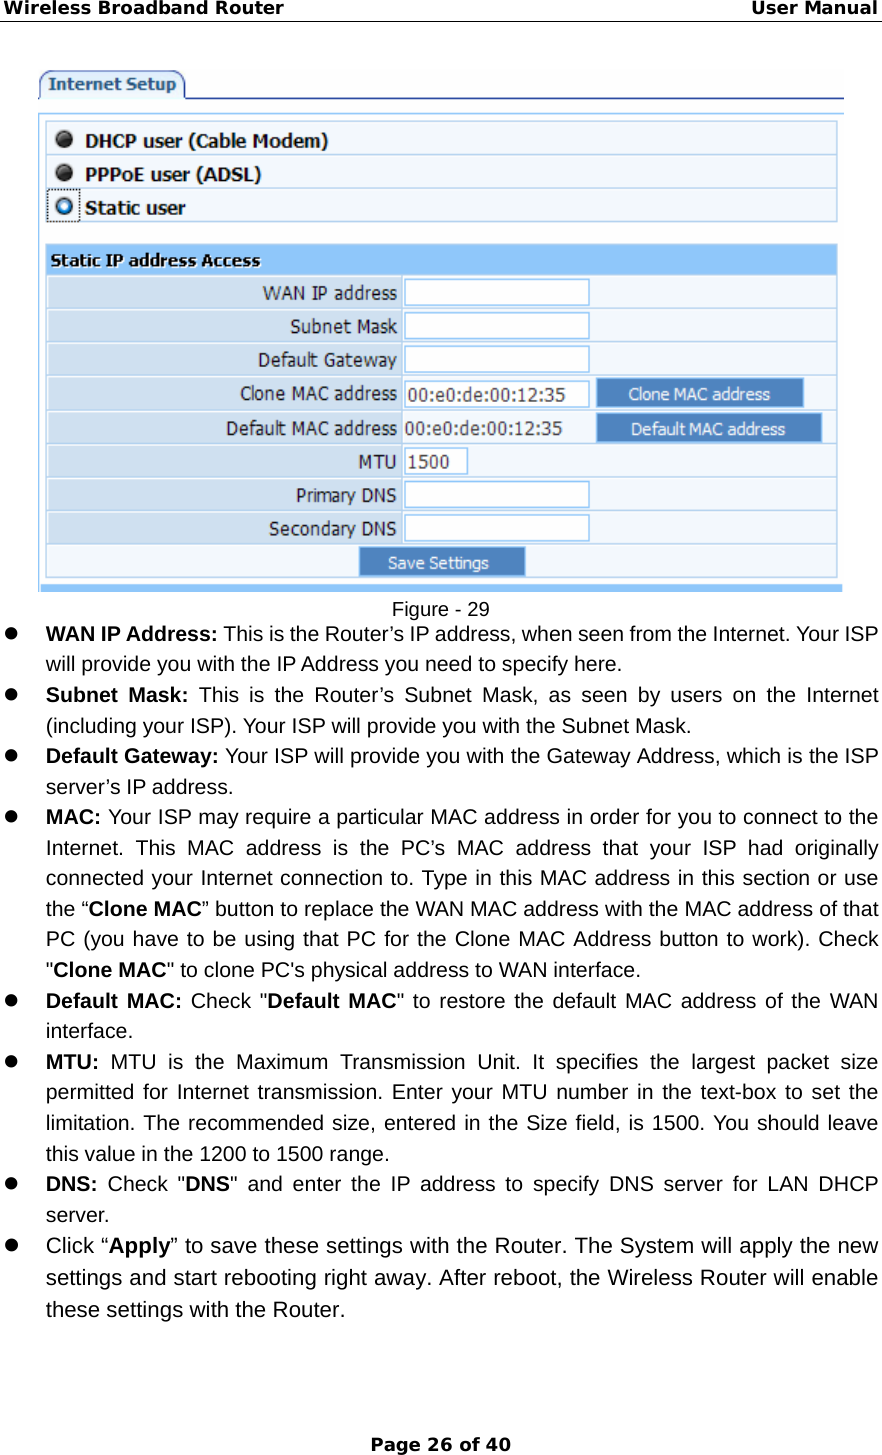 Wireless Broadband Router                                                   User Manual Page 26 of 40  Figure - 29 z WAN IP Address: This is the Router’s IP address, when seen from the Internet. Your ISP will provide you with the IP Address you need to specify here. z Subnet Mask: This is the Router’s Subnet Mask, as seen by users on the Internet (including your ISP). Your ISP will provide you with the Subnet Mask. z Default Gateway: Your ISP will provide you with the Gateway Address, which is the ISP server’s IP address. z MAC: Your ISP may require a particular MAC address in order for you to connect to the Internet. This MAC address is the PC’s MAC address that your ISP had originally connected your Internet connection to. Type in this MAC address in this section or use the “Clone MAC” button to replace the WAN MAC address with the MAC address of that PC (you have to be using that PC for the Clone MAC Address button to work). Check &quot;Clone MAC&quot; to clone PC&apos;s physical address to WAN interface. z Default MAC: Check &quot;Default MAC&quot; to restore the default MAC address of the WAN interface. z MTU: MTU is the Maximum Transmission Unit. It specifies the largest packet size permitted for Internet transmission. Enter your MTU number in the text-box to set the limitation. The recommended size, entered in the Size field, is 1500. You should leave this value in the 1200 to 1500 range. z DNS: Check &quot;DNS&quot; and enter the IP address to specify DNS server for LAN DHCP server. z Click “Apply” to save these settings with the Router. The System will apply the new settings and start rebooting right away. After reboot, the Wireless Router will enable these settings with the Router.  